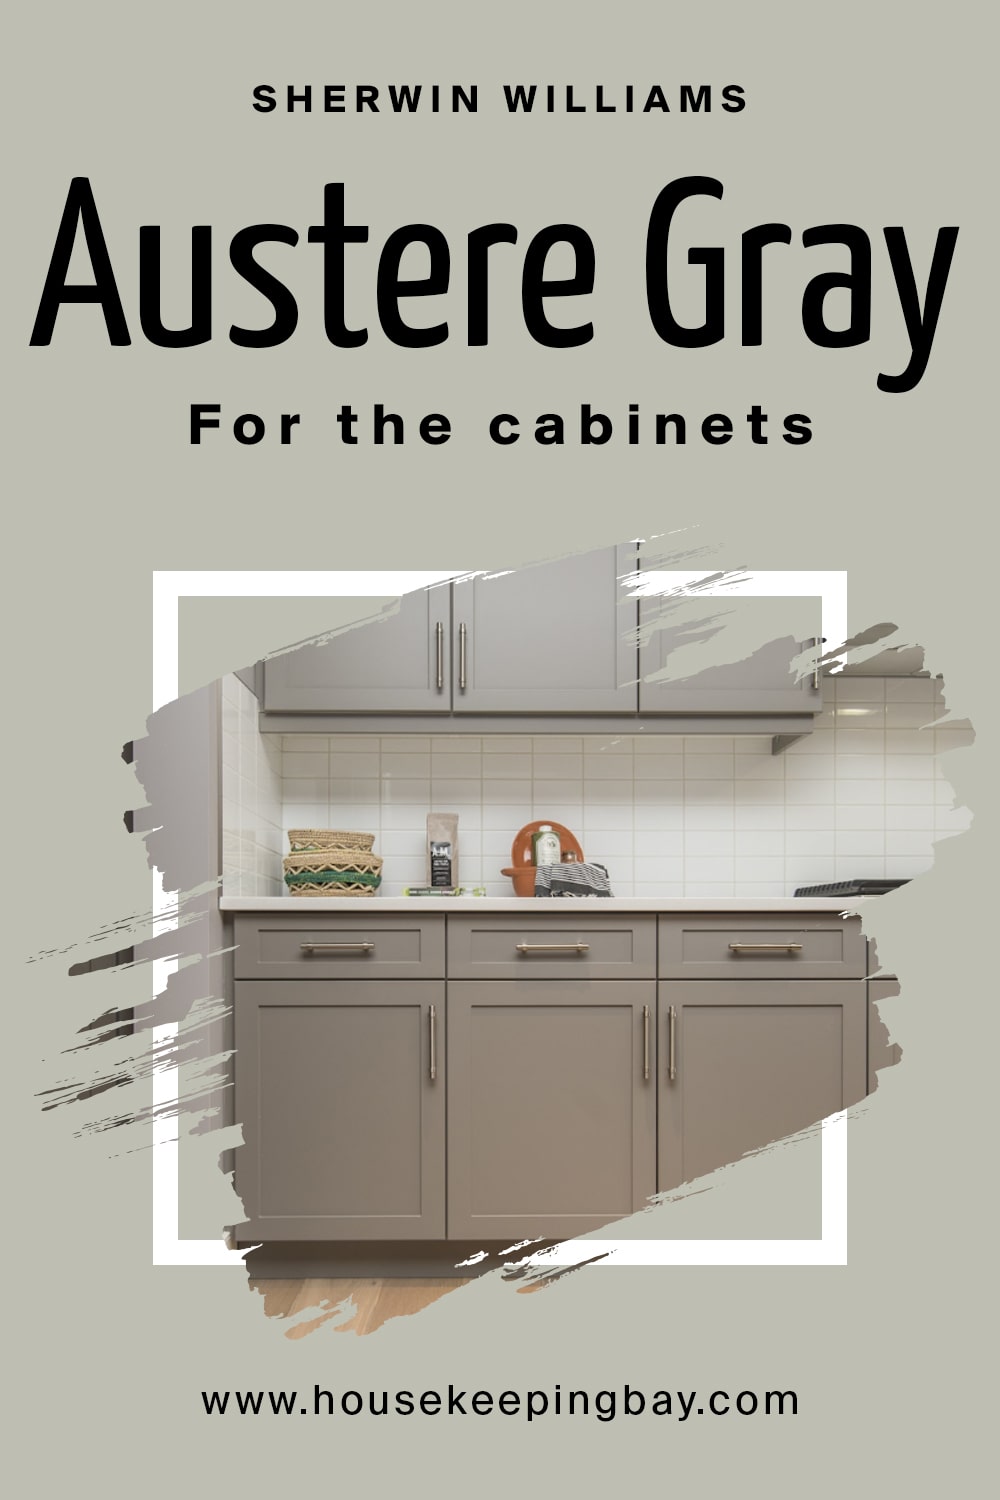 Sherwin Williams. Austere Gray For the cabinets